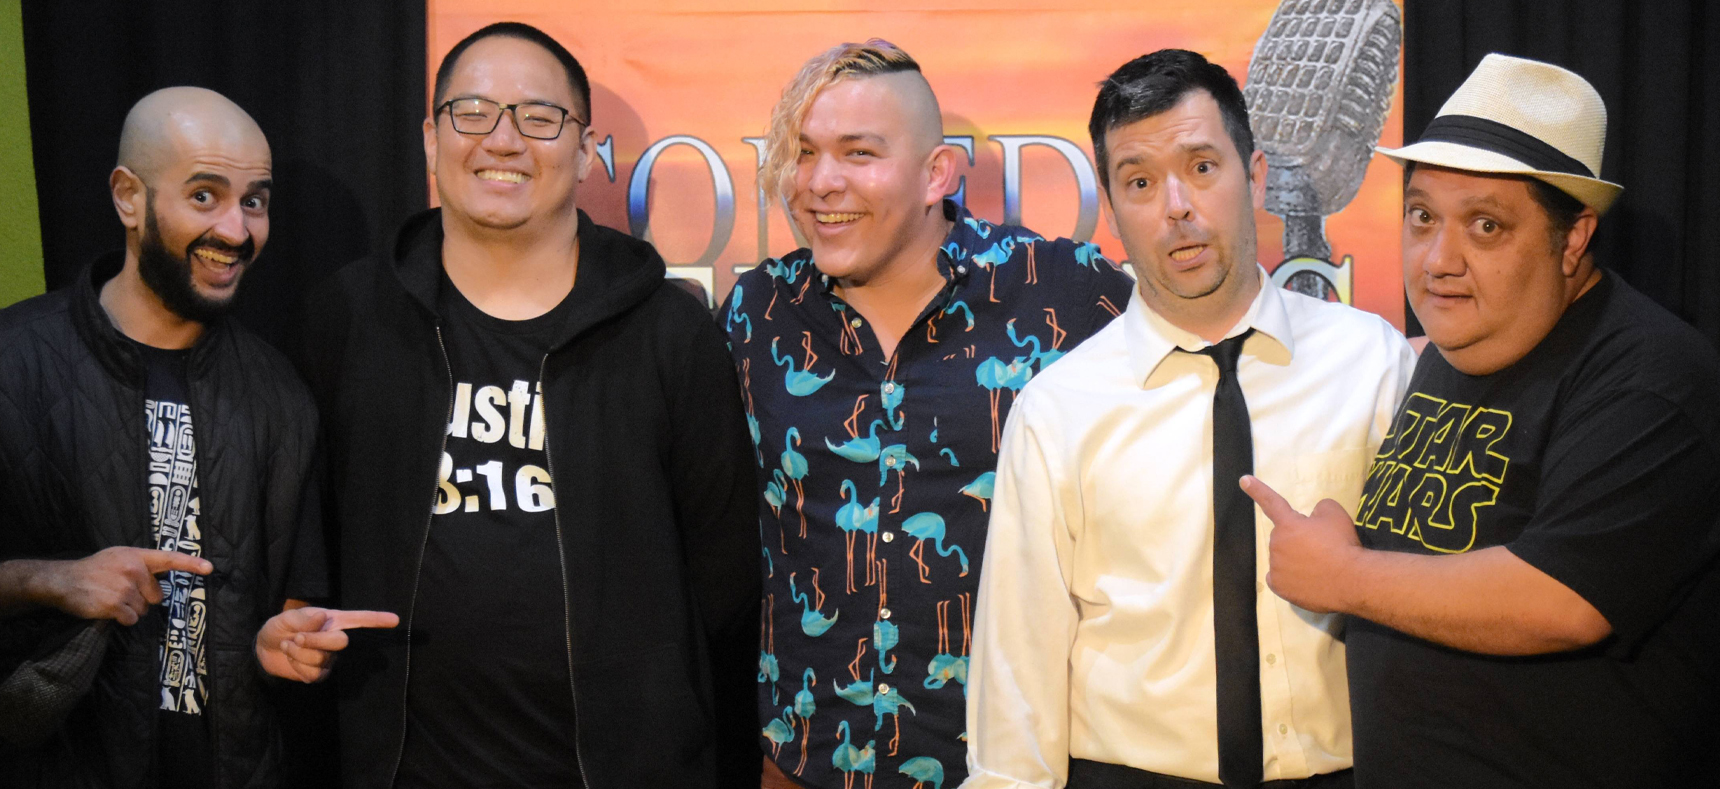 Julian Fernandez, Franklin Yi and the rest of our comedians delivered two fantastic shows at Comedy Heights this past weekend.